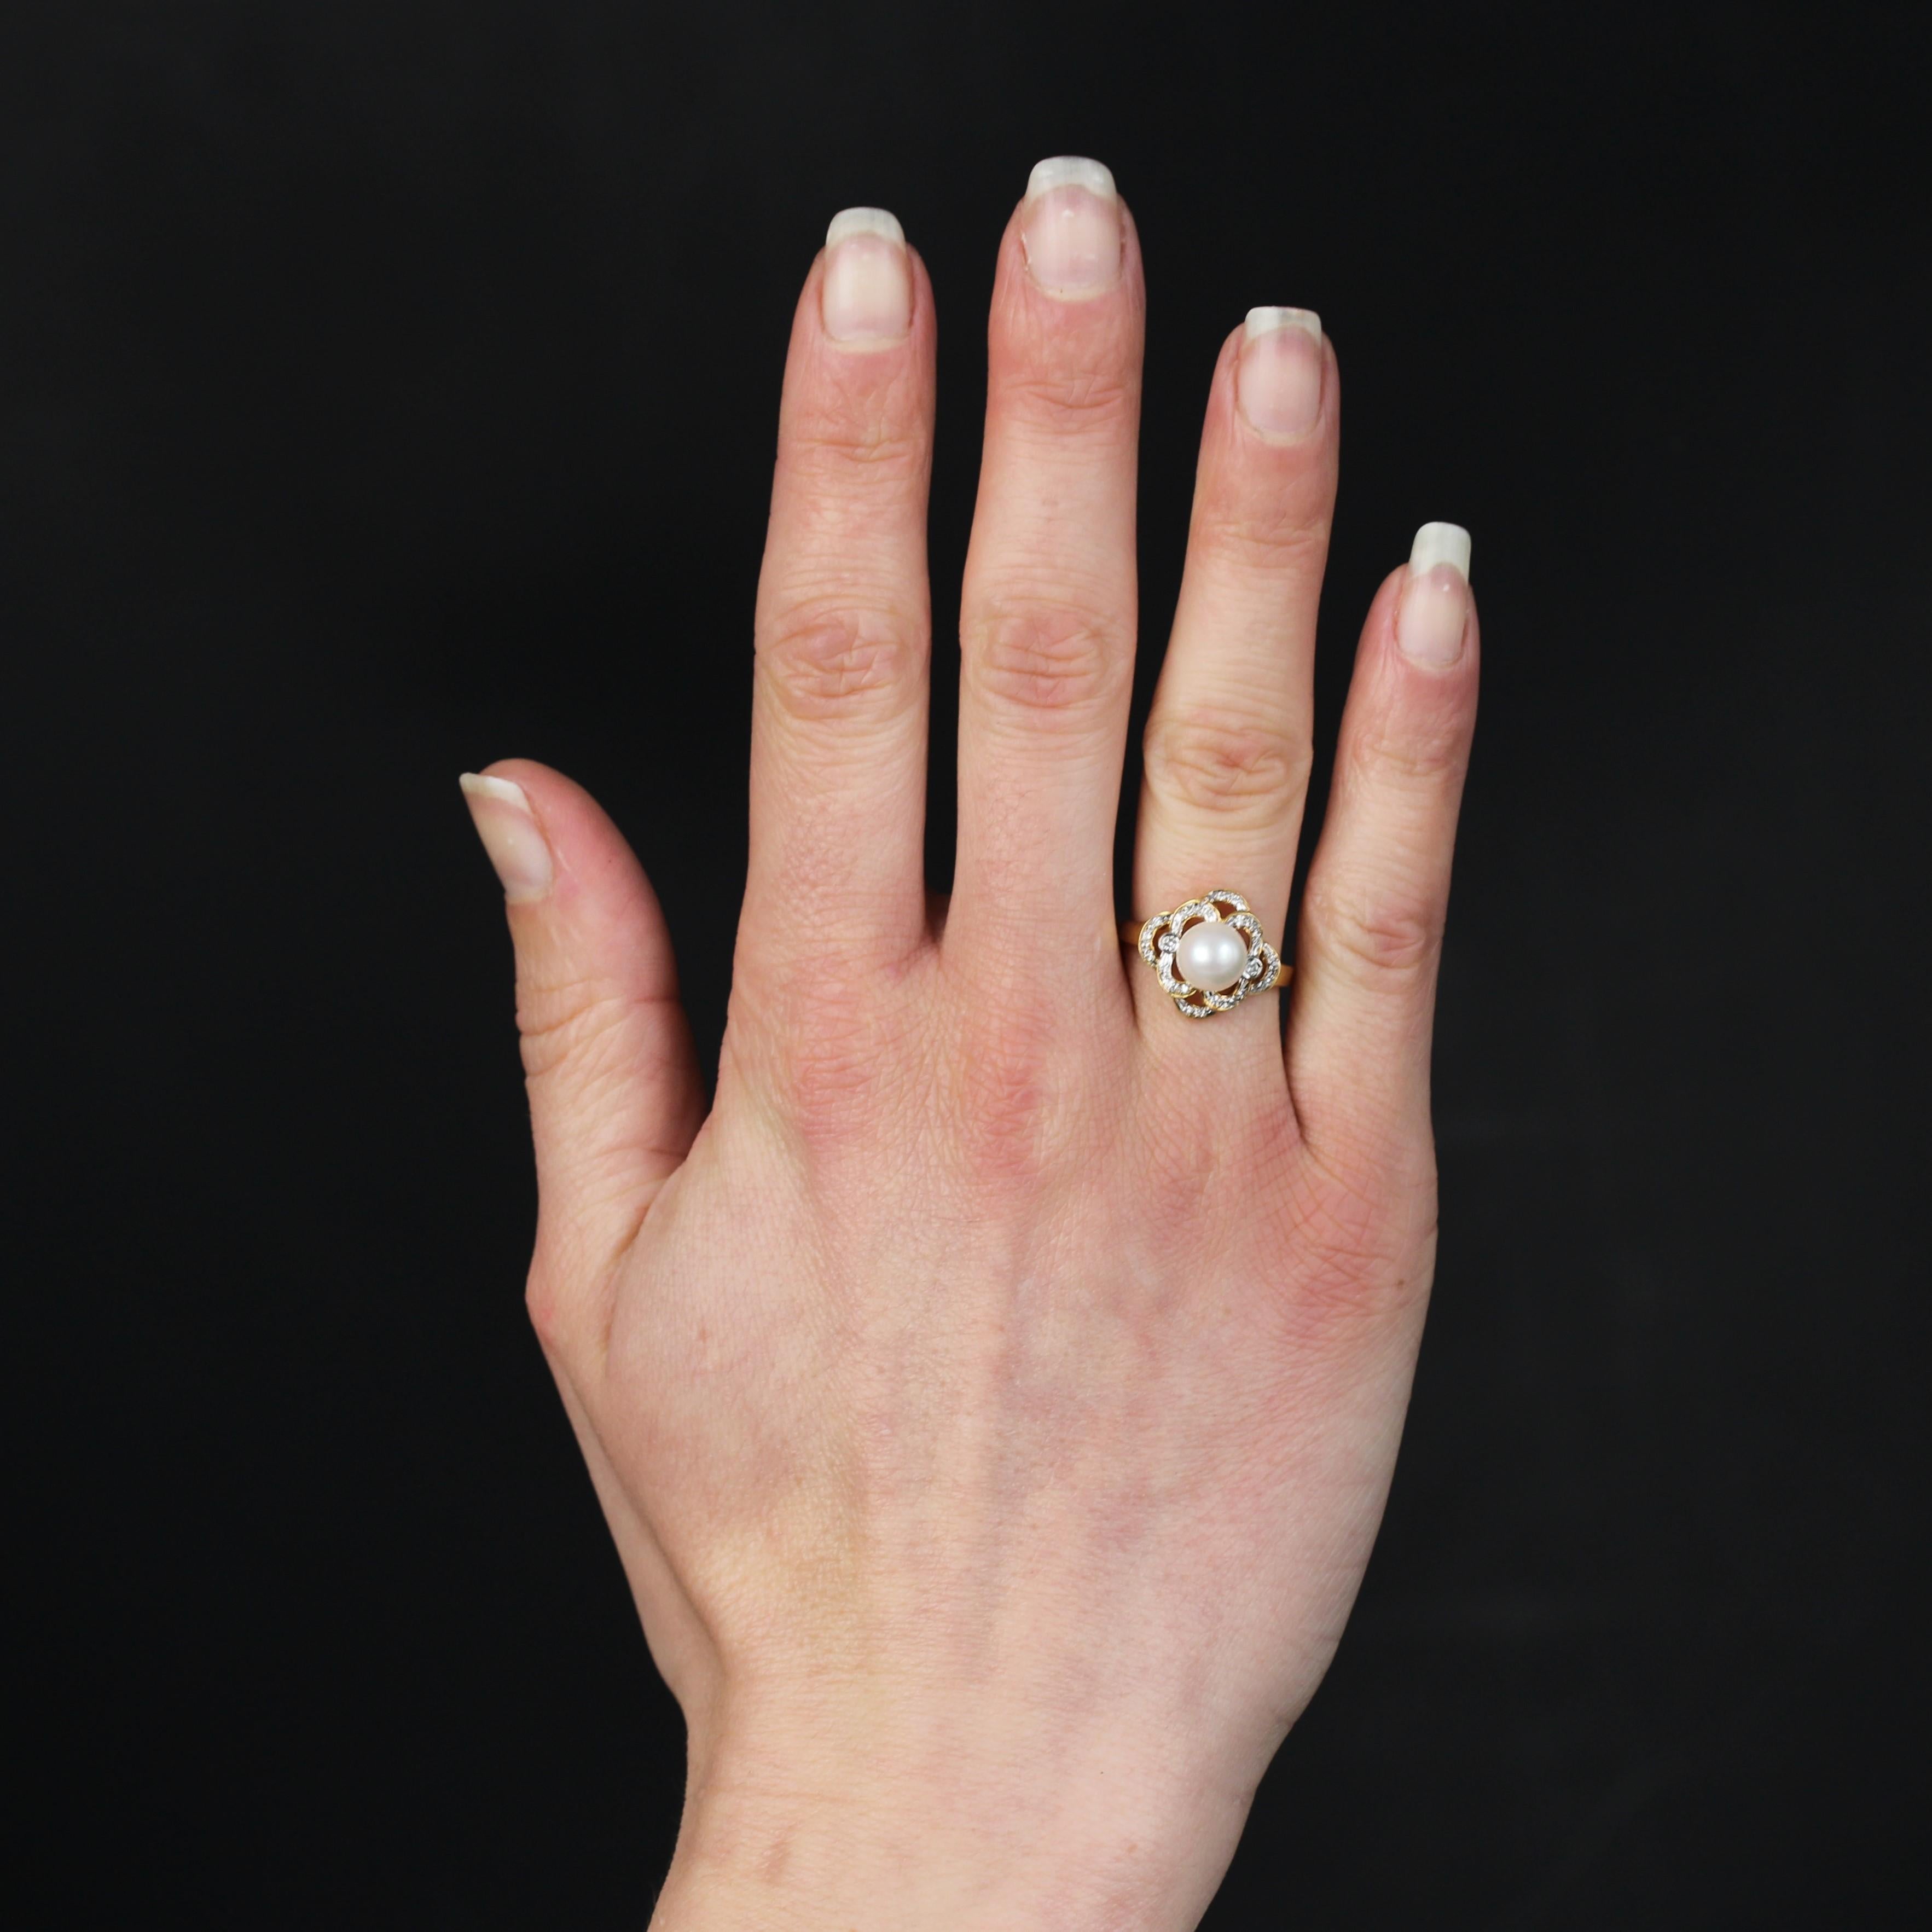 Ring in 18 karat yellow gold.
In the spirit of antique rings, the setting of this enchanting pearl ring is openworked with arabesques set with small modern brilliant-cut diamonds. Two larger diamonds set in a closed setting frame a round Japanese